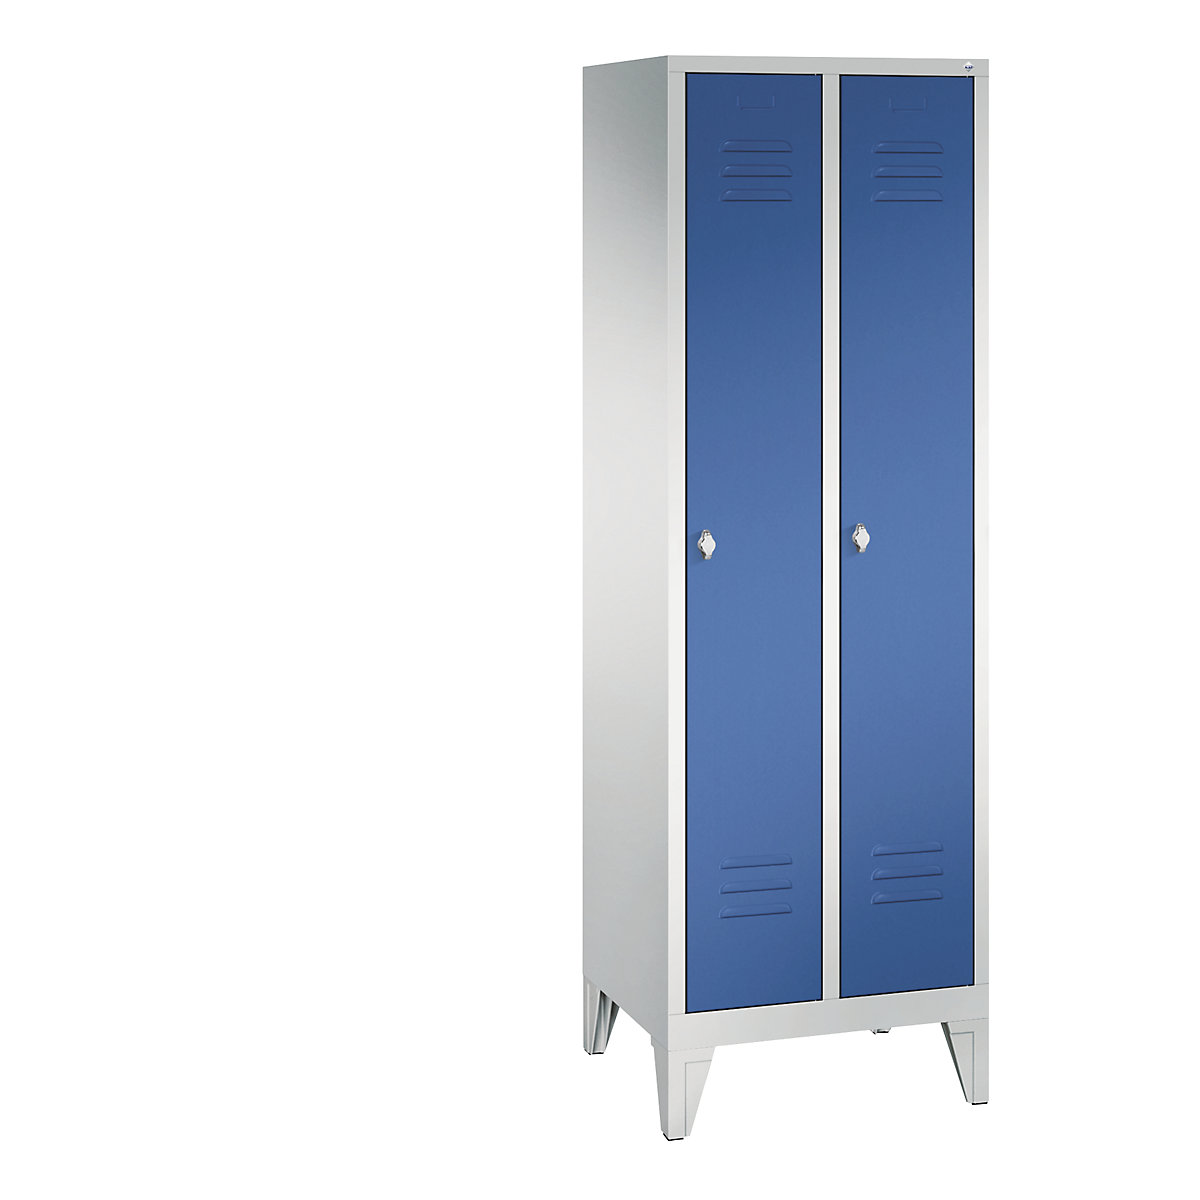 CLASSIC cloakroom locker with feet – C+P, 2 compartments, compartment width 300 mm, light grey / gentian blue-9